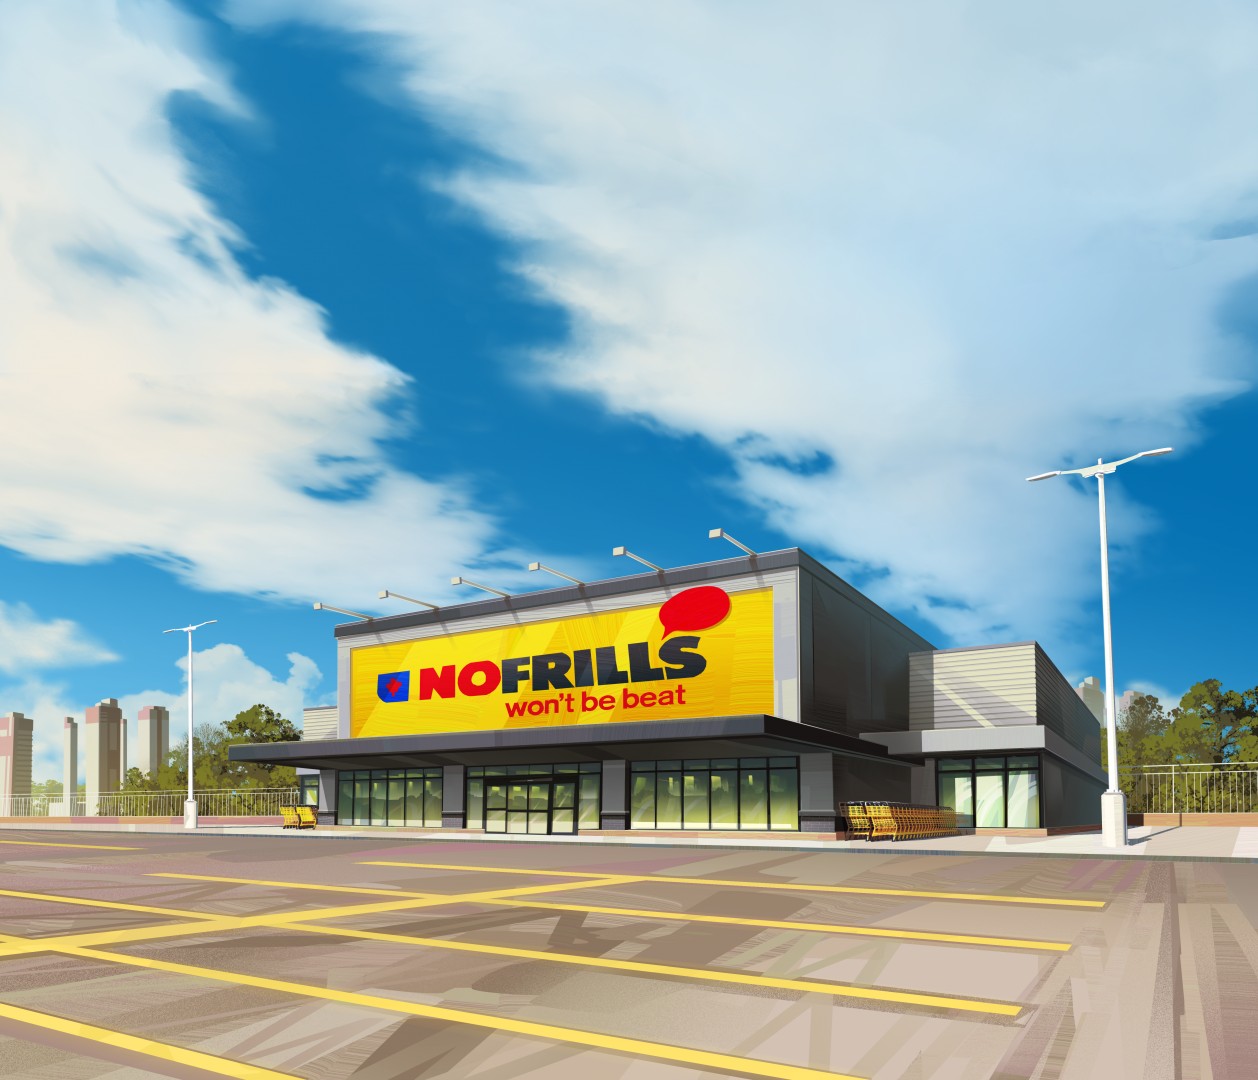 Store No. 5 first specifically built for No Frills – Winnipeg Free